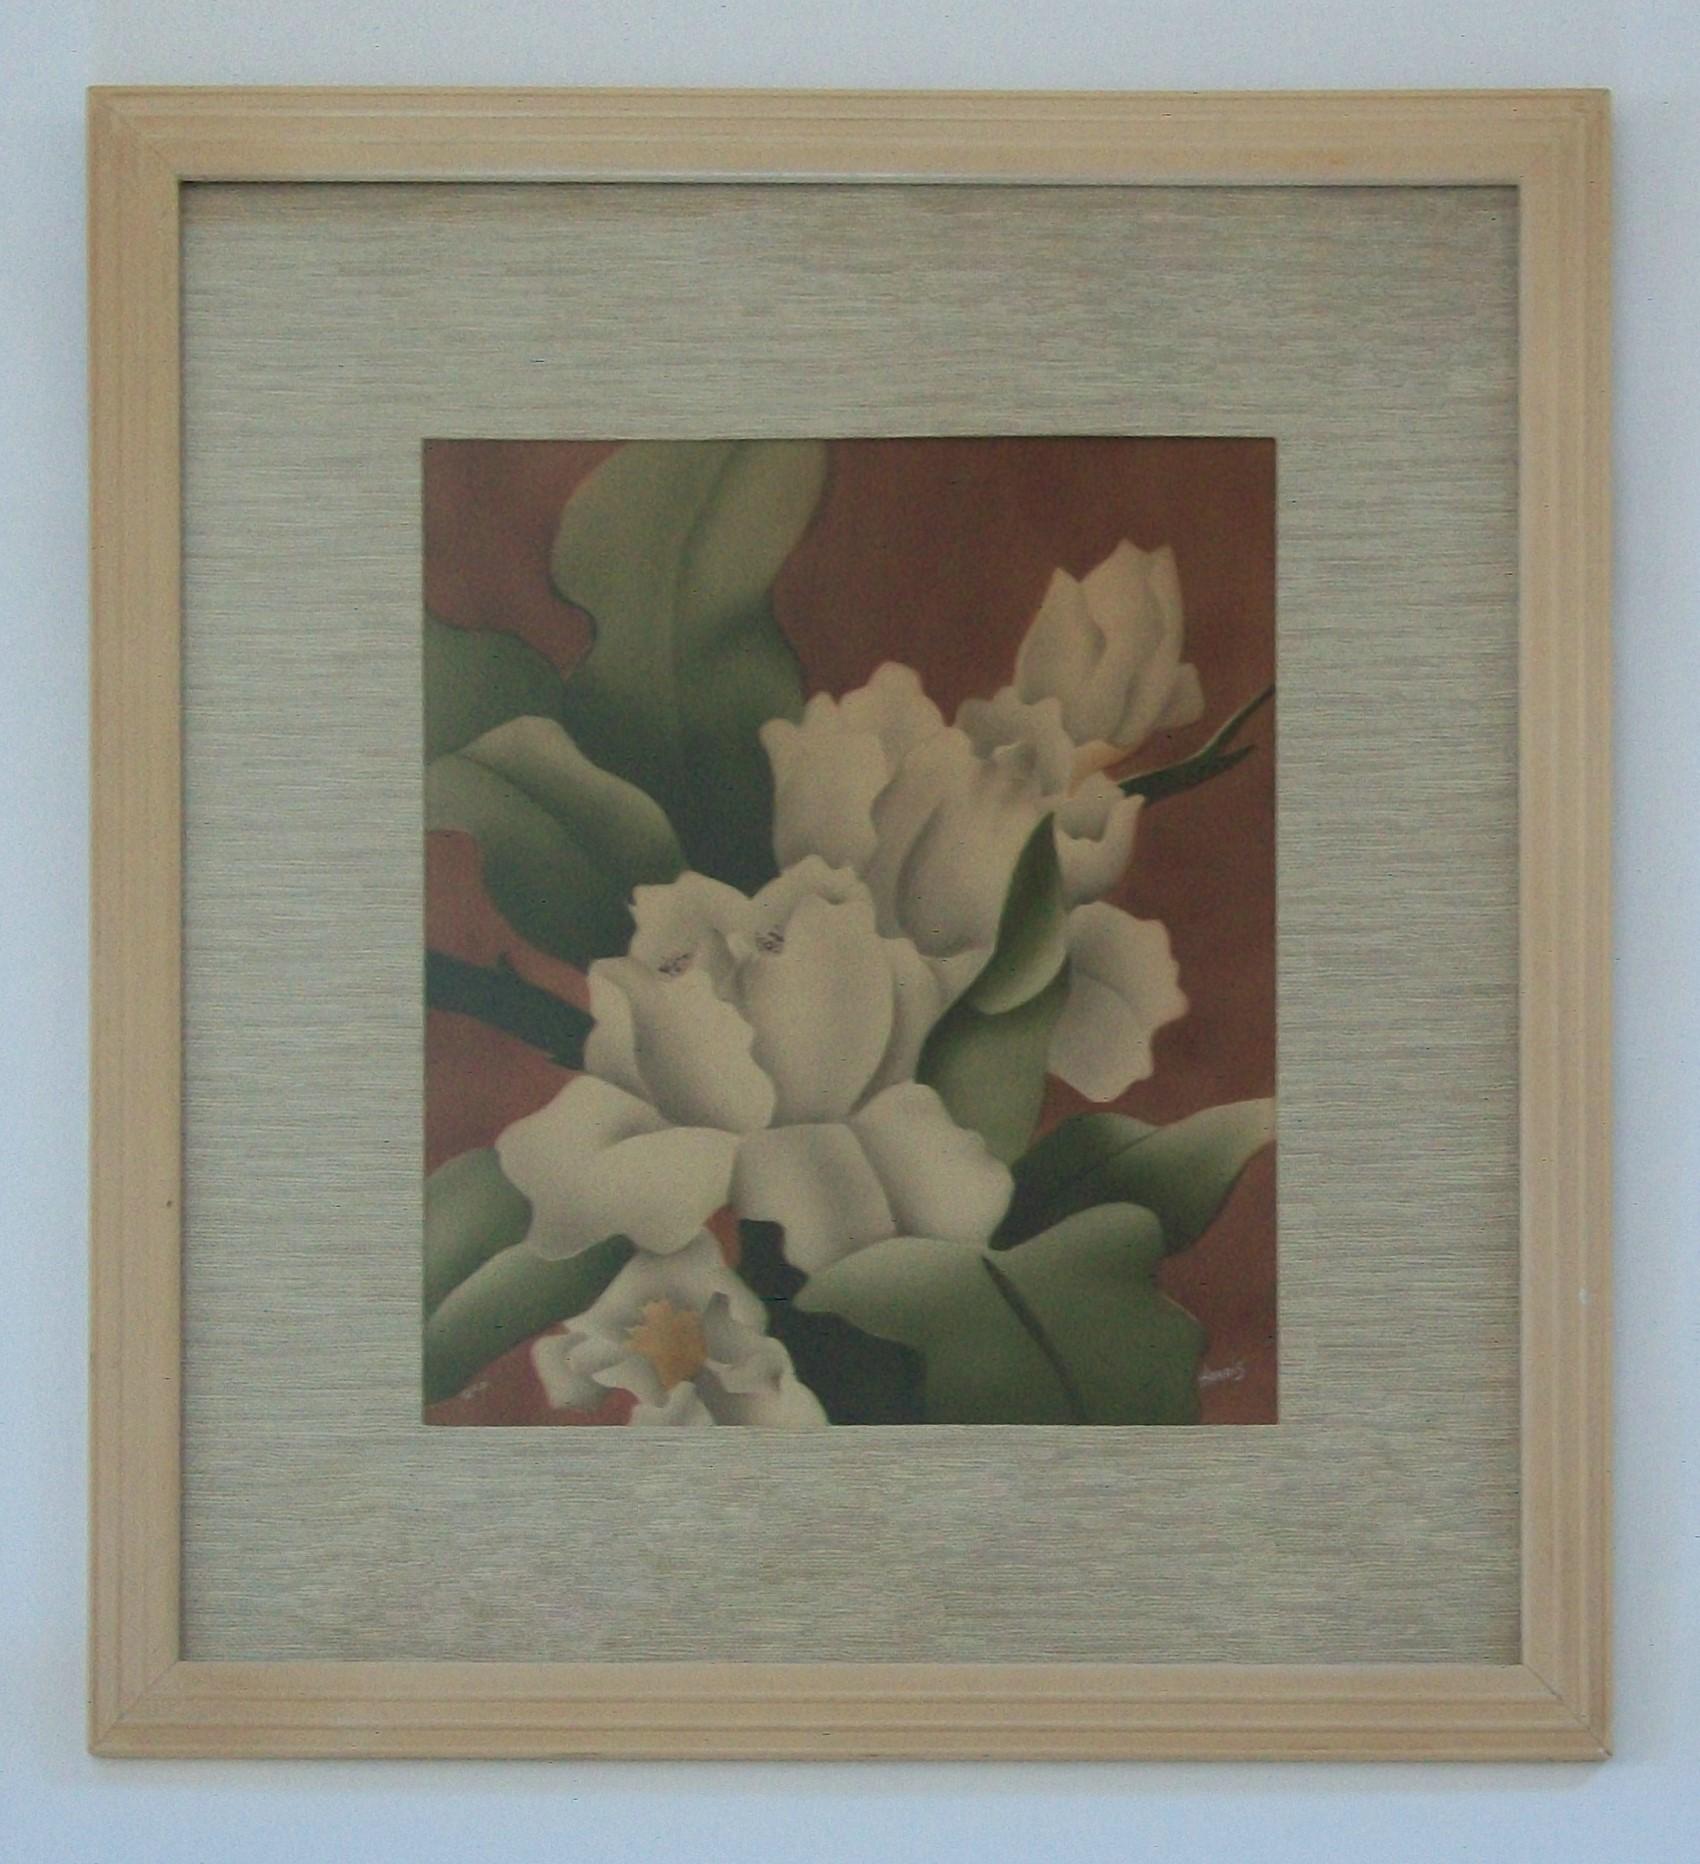 Benjamin Jorj Harris, Newman Decor - American Art Deco airbrush painting on illustration board - featuring an over-sized group of white gardenia blossoms and leaves (the quintessential Art Deco flower) set against a wine colored background - signed